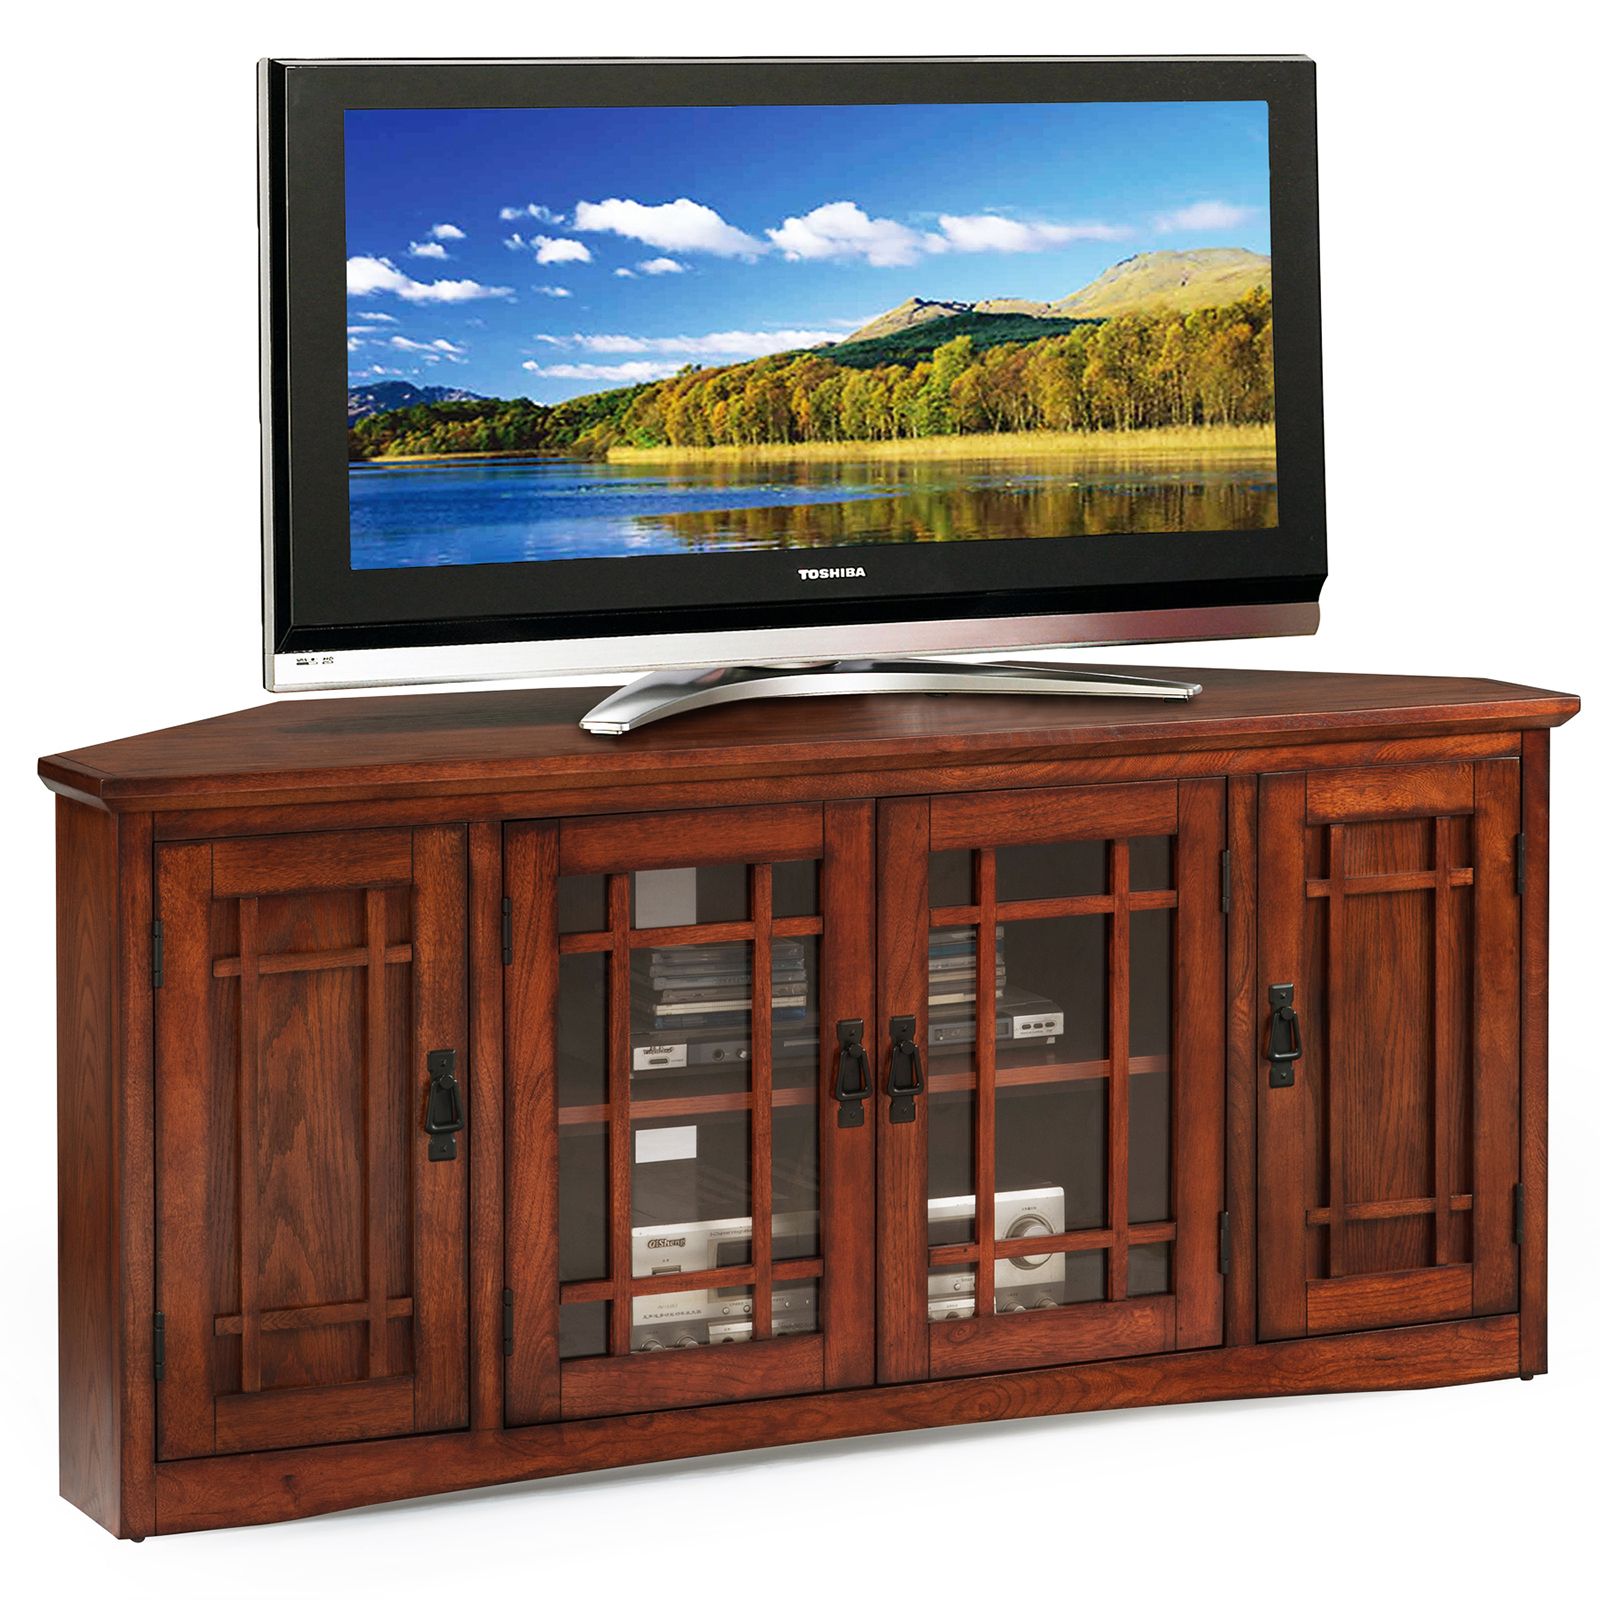 Leick Home Tv Stand – Oak Brown – Tv Stands At Hayneedle Pertaining To Oak Tv Stands (View 3 of 15)